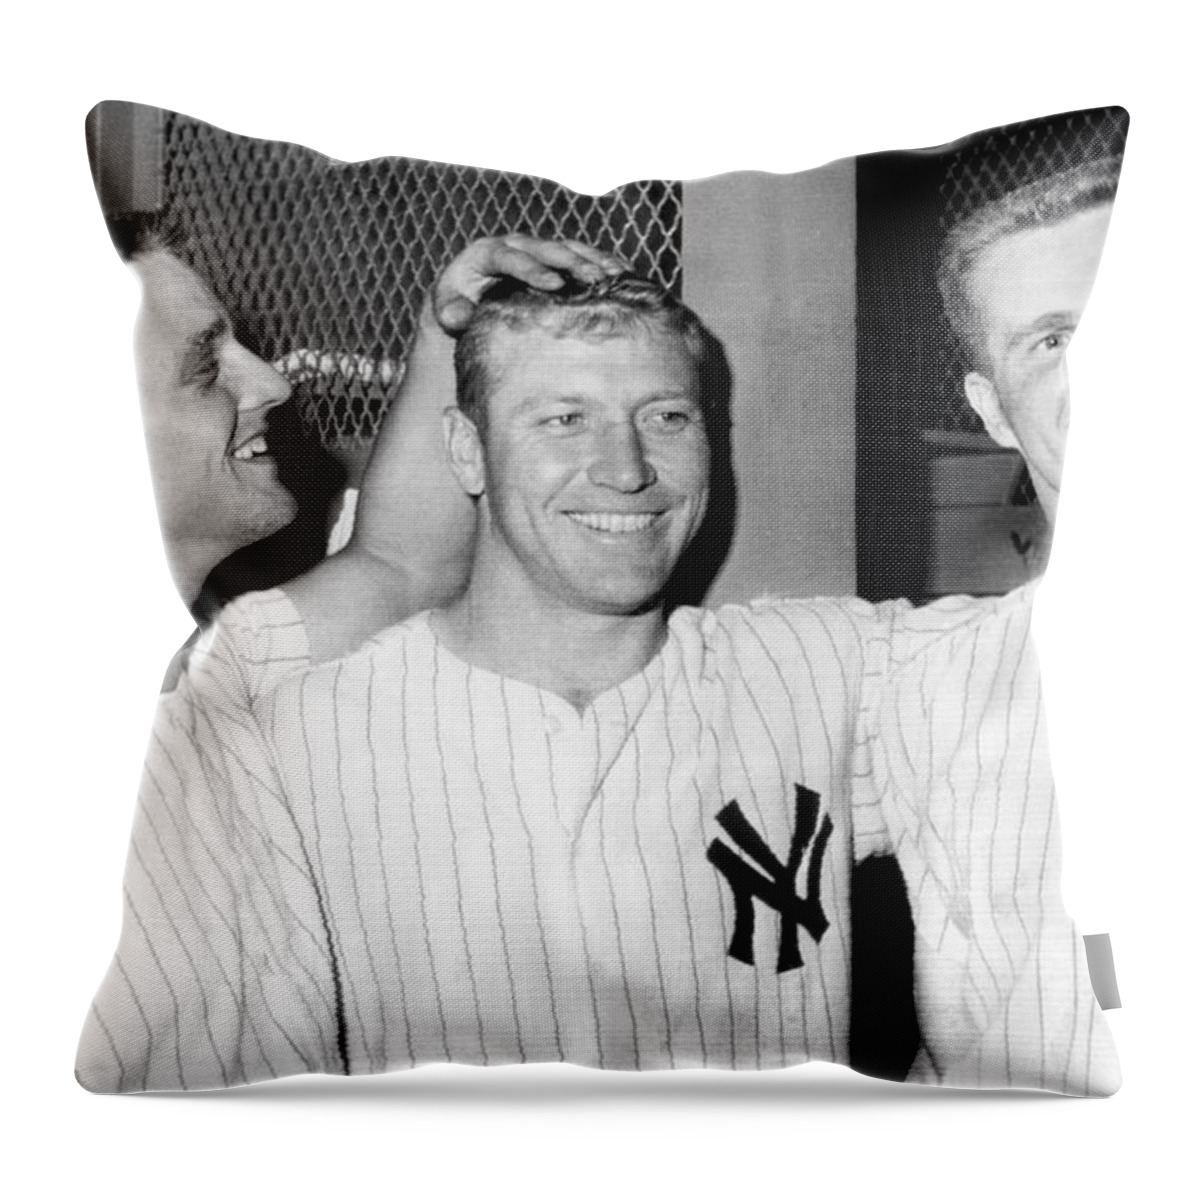 1961 Throw Pillow featuring the photograph Yankees Celebrate Victory by Underwood Archives